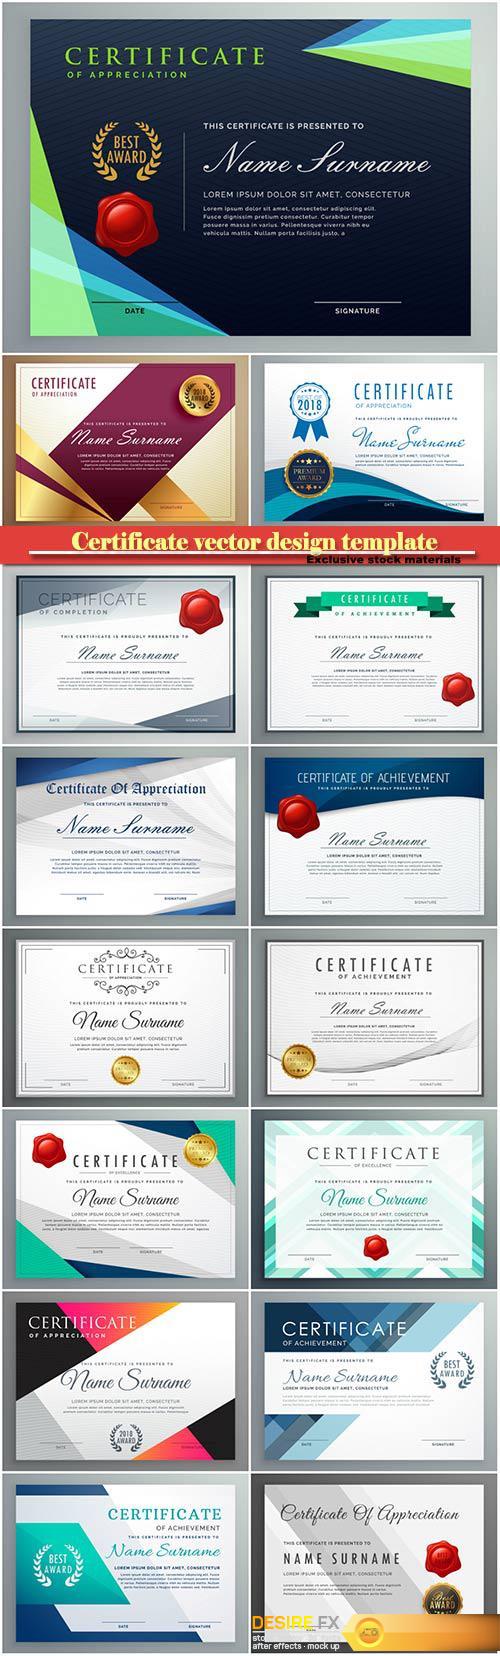 Certificate and vector diploma design template # 38